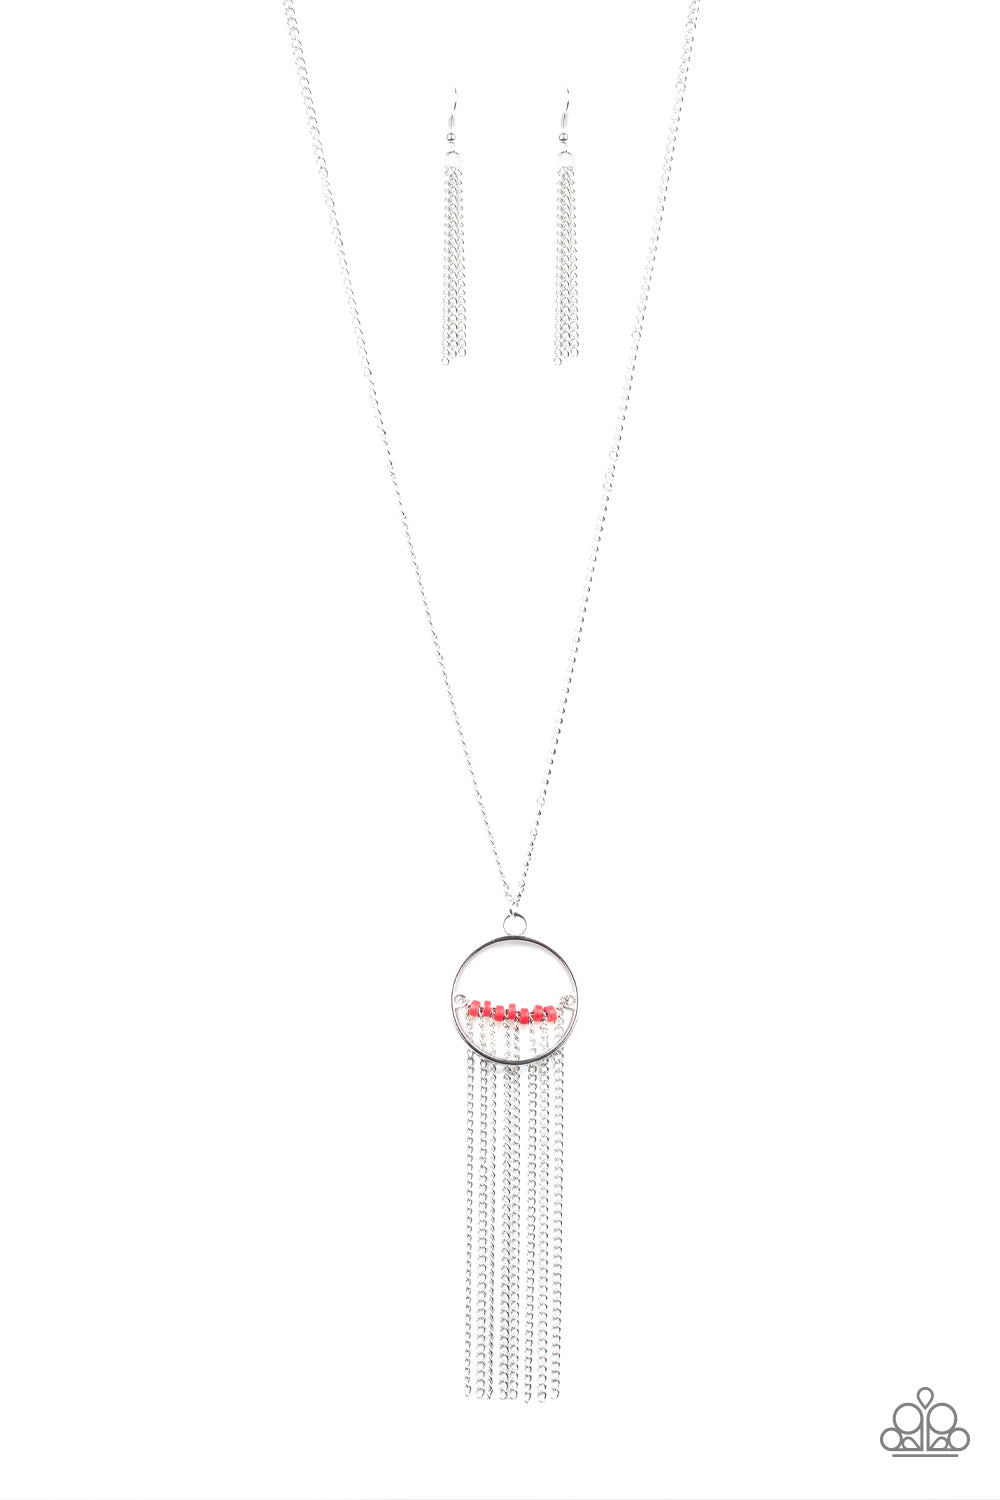 Paparazzi Accessories - Terra Tassel - Red Necklace - Alies Bling Bar